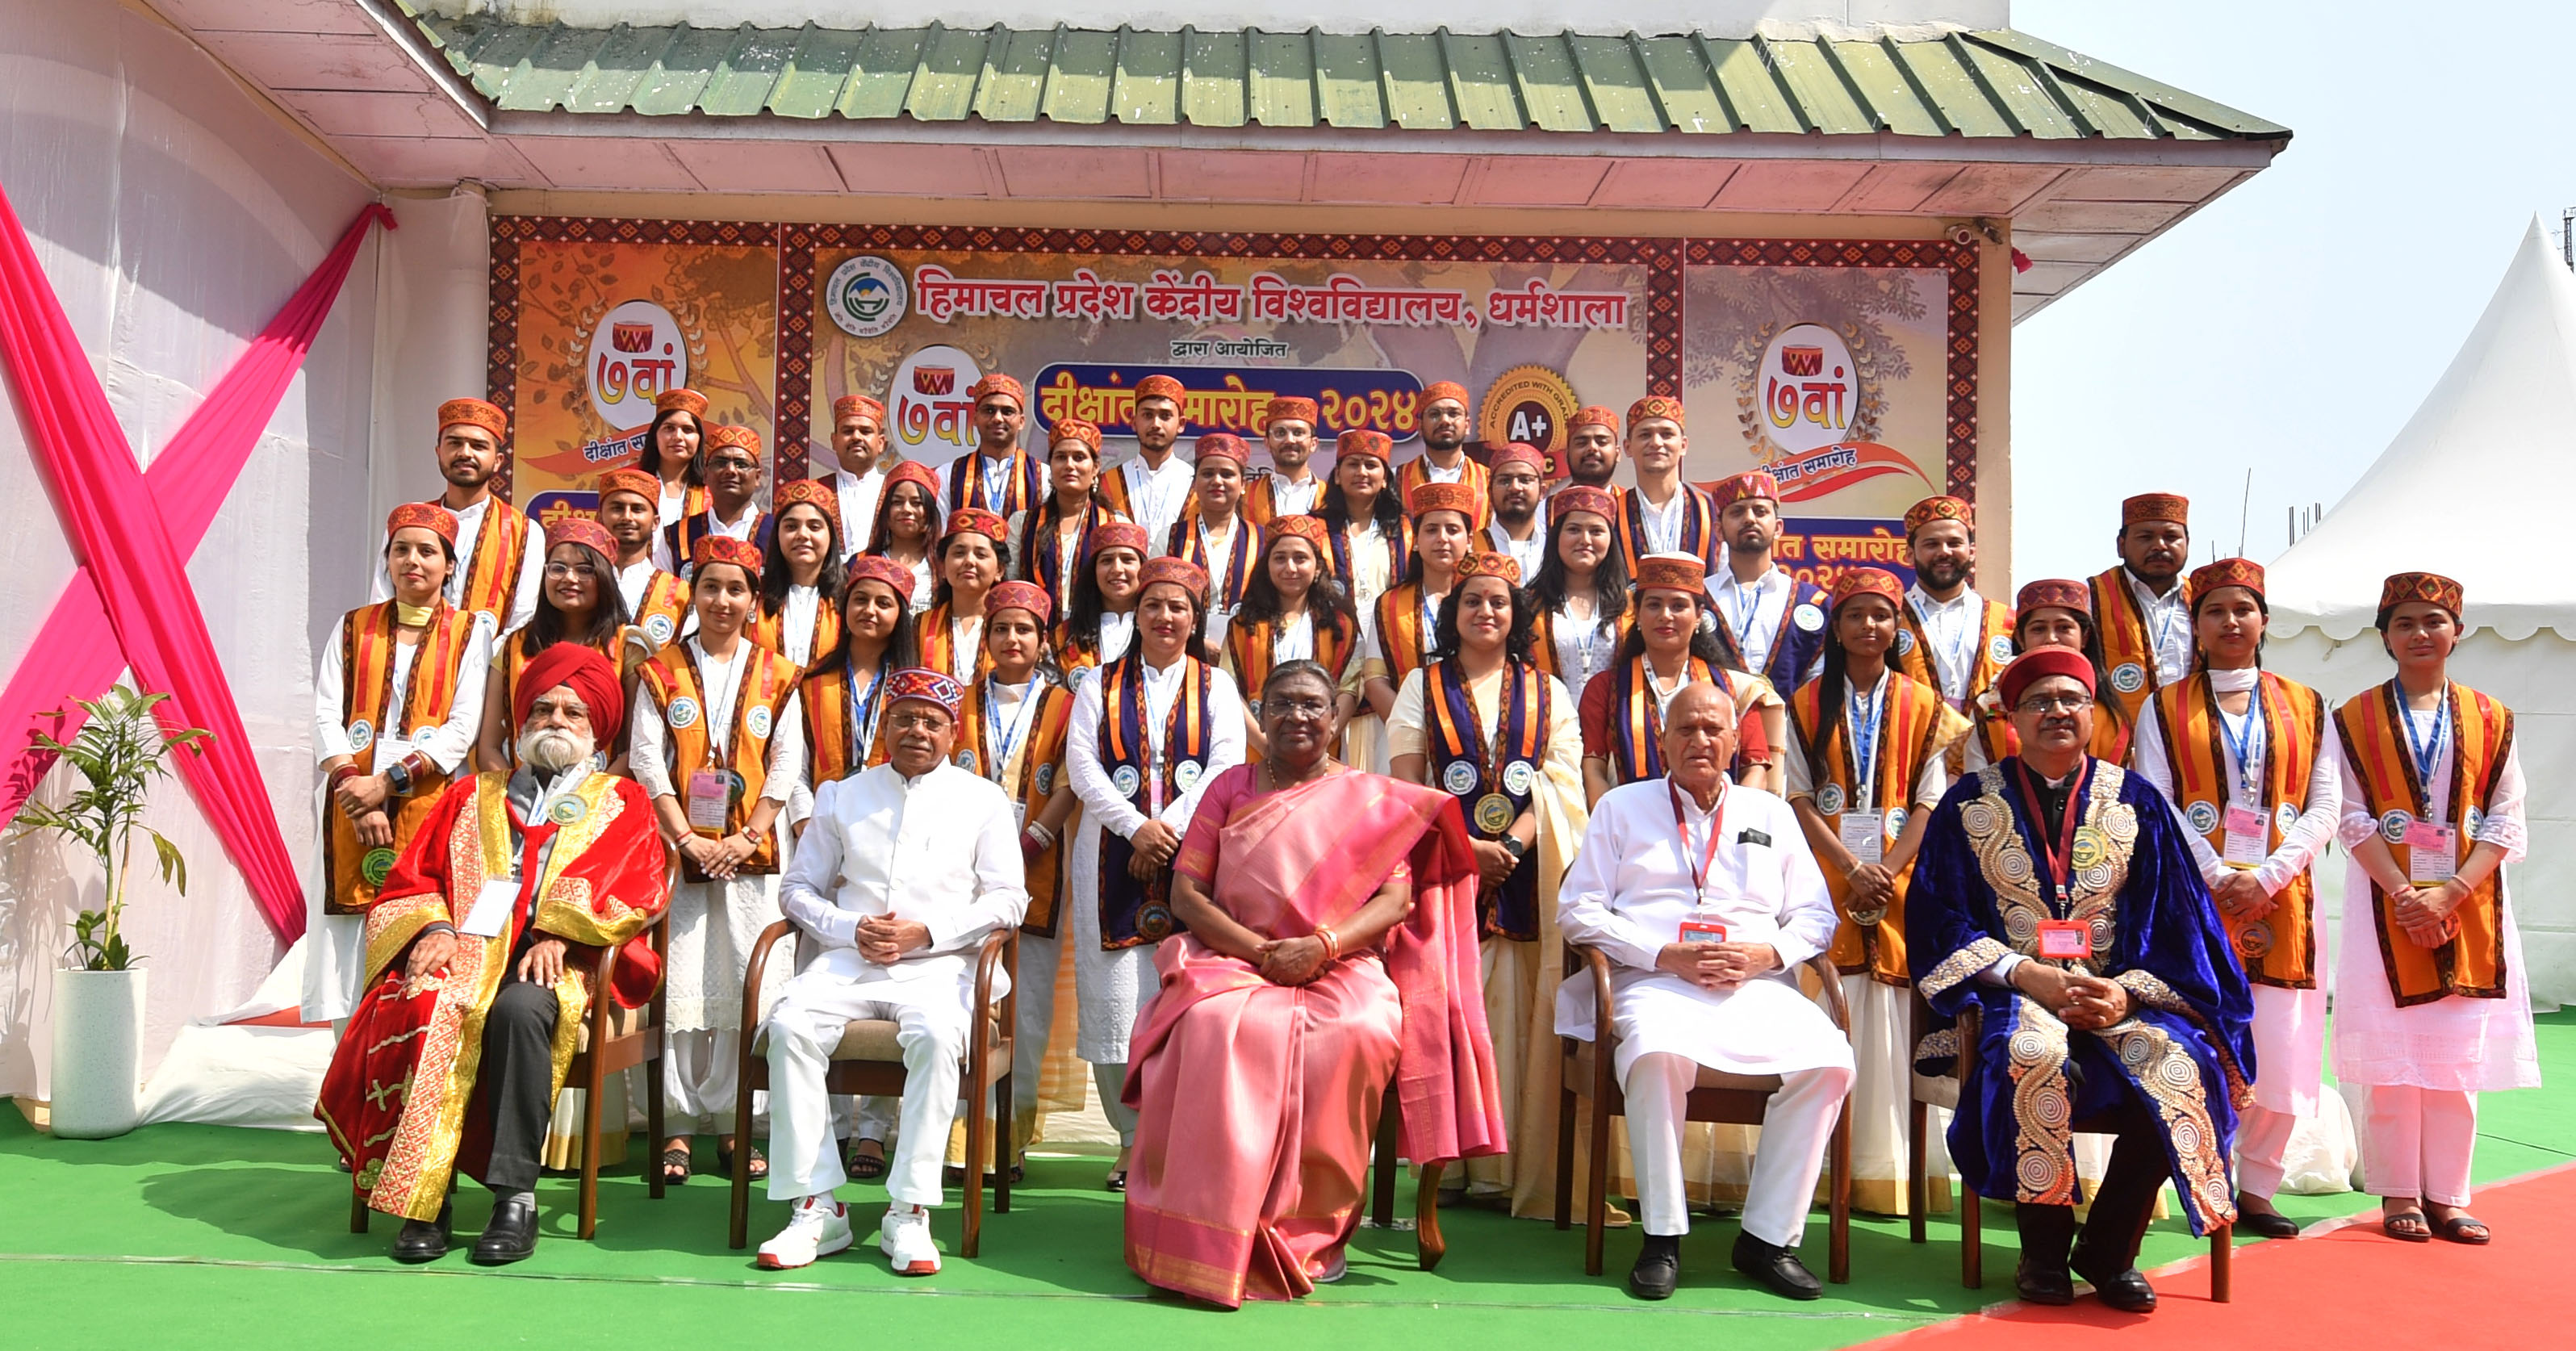 Youths are most important link to fulfill resolve of a developed India: President Murmu